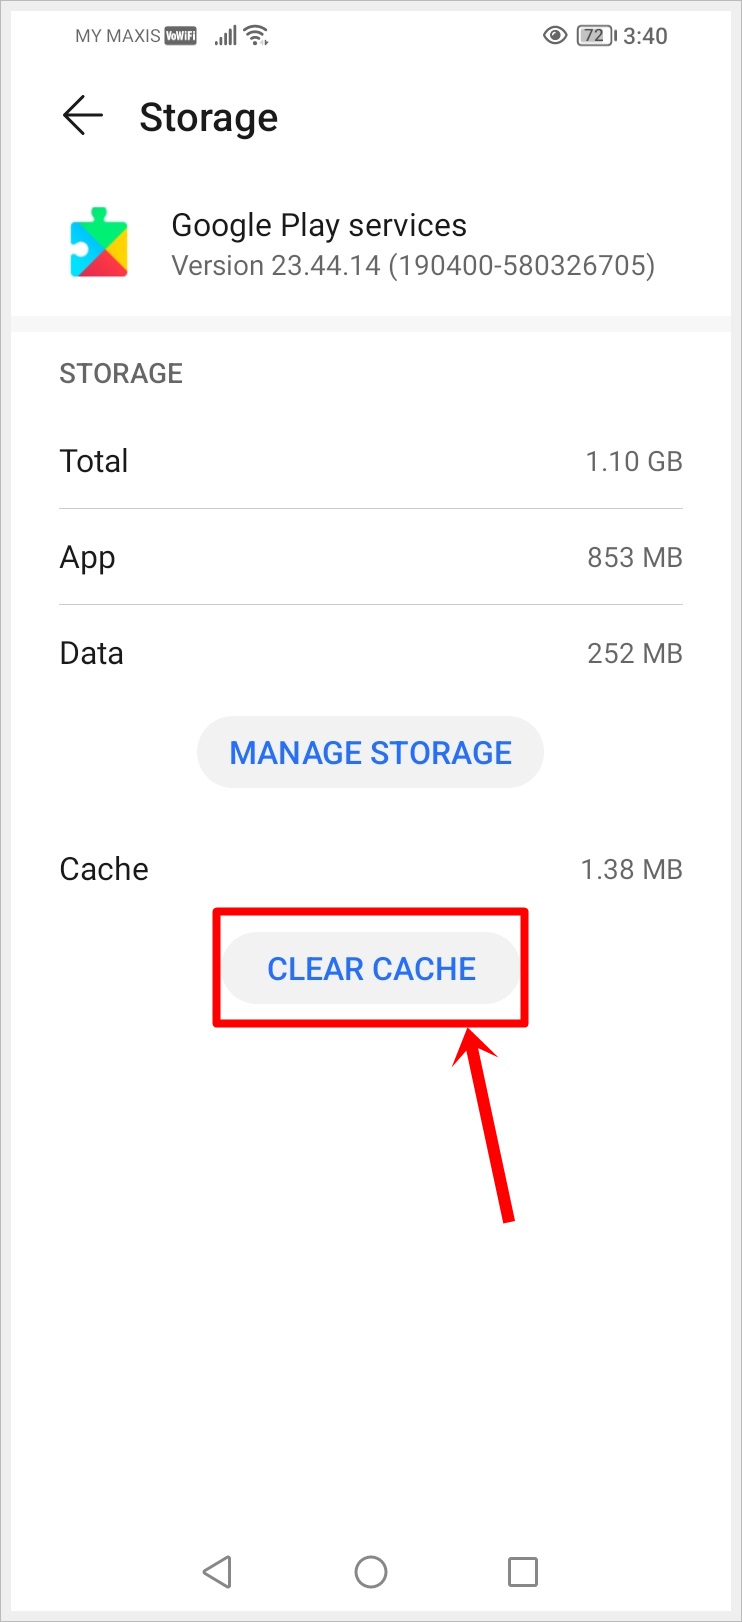 How to Fix "Google Play Services Keeps Stopping" Error: This image shows the Storage page of the 'Google play services' app. The 'CLEAR CACHE' button is highlighted.